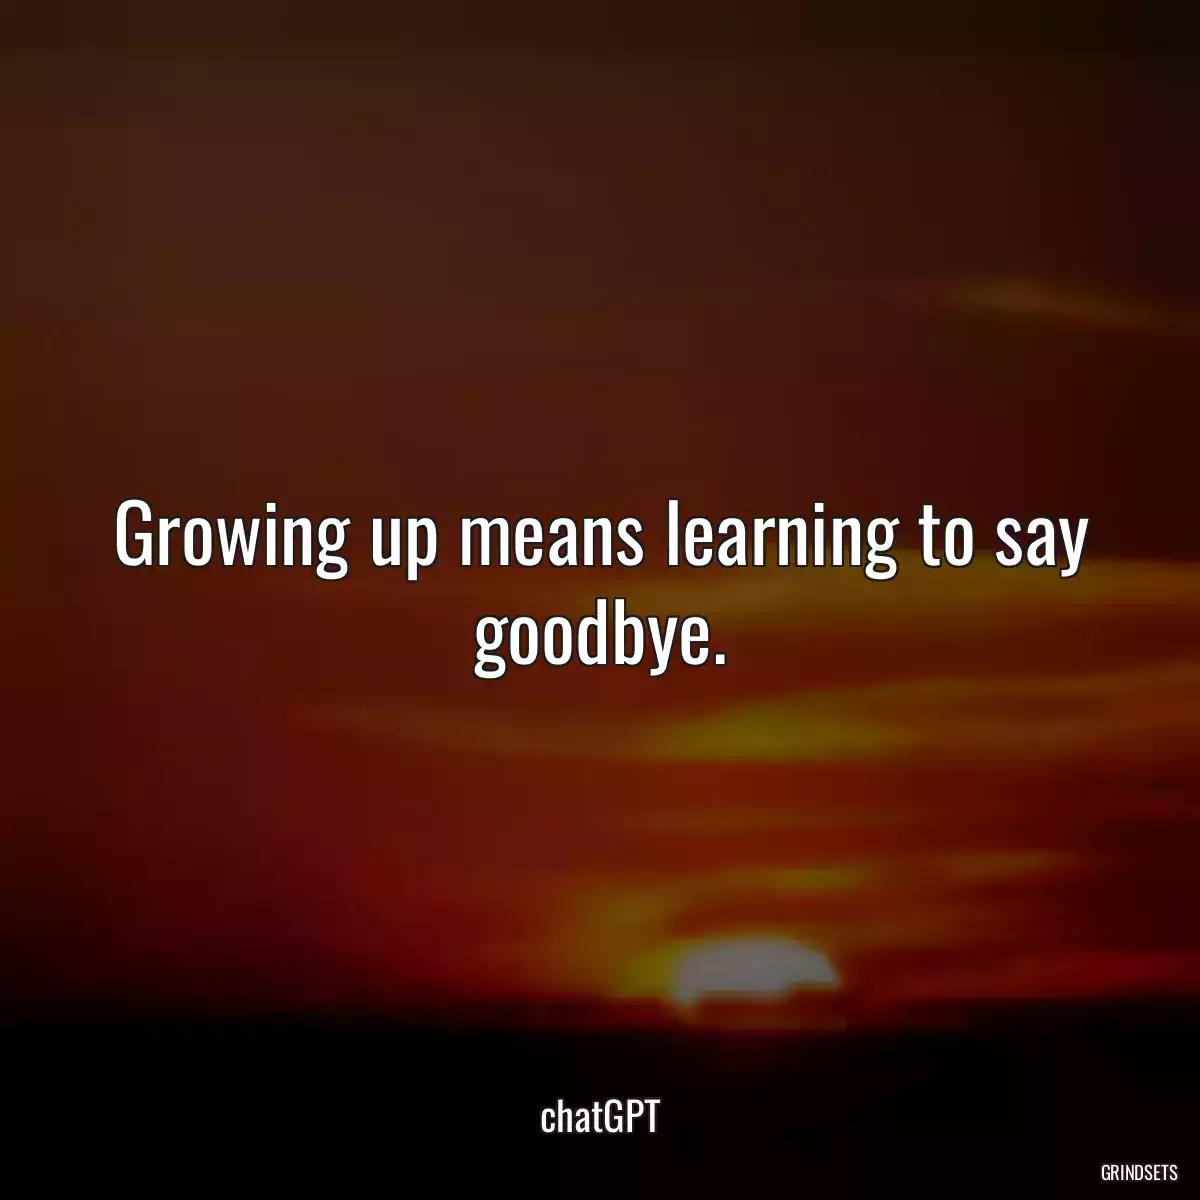 Growing up means learning to say goodbye.